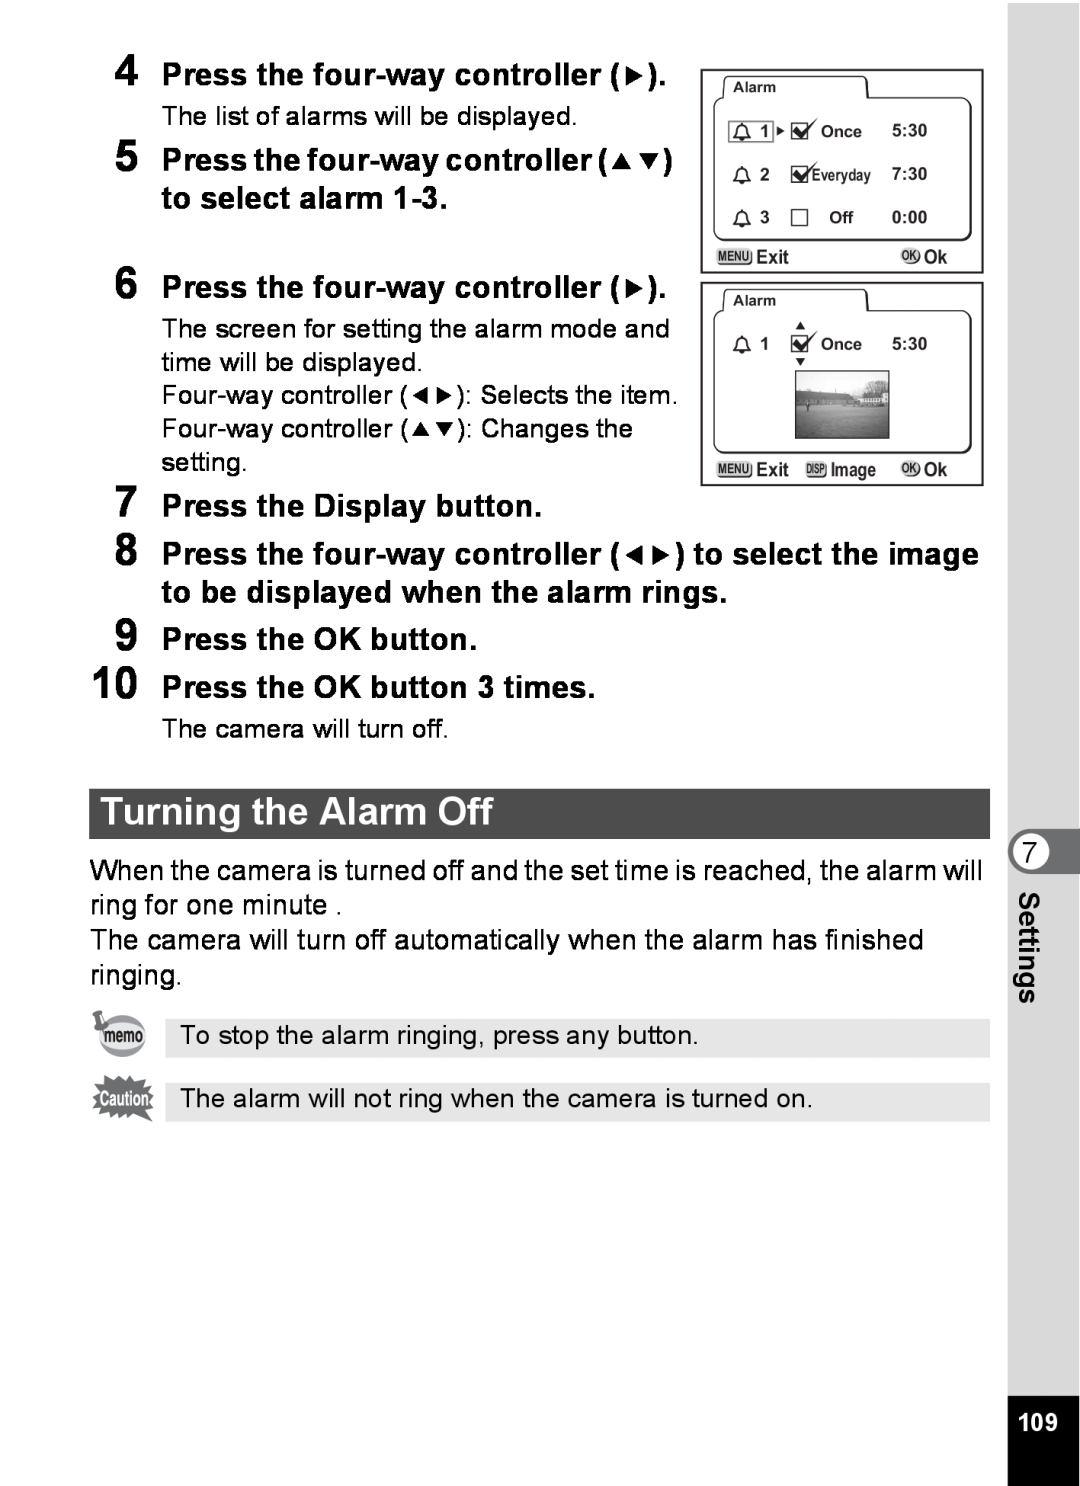 Pentax S4 manual Turning the Alarm Off, to select alarm, Press the Display button, Press the four-way controller 